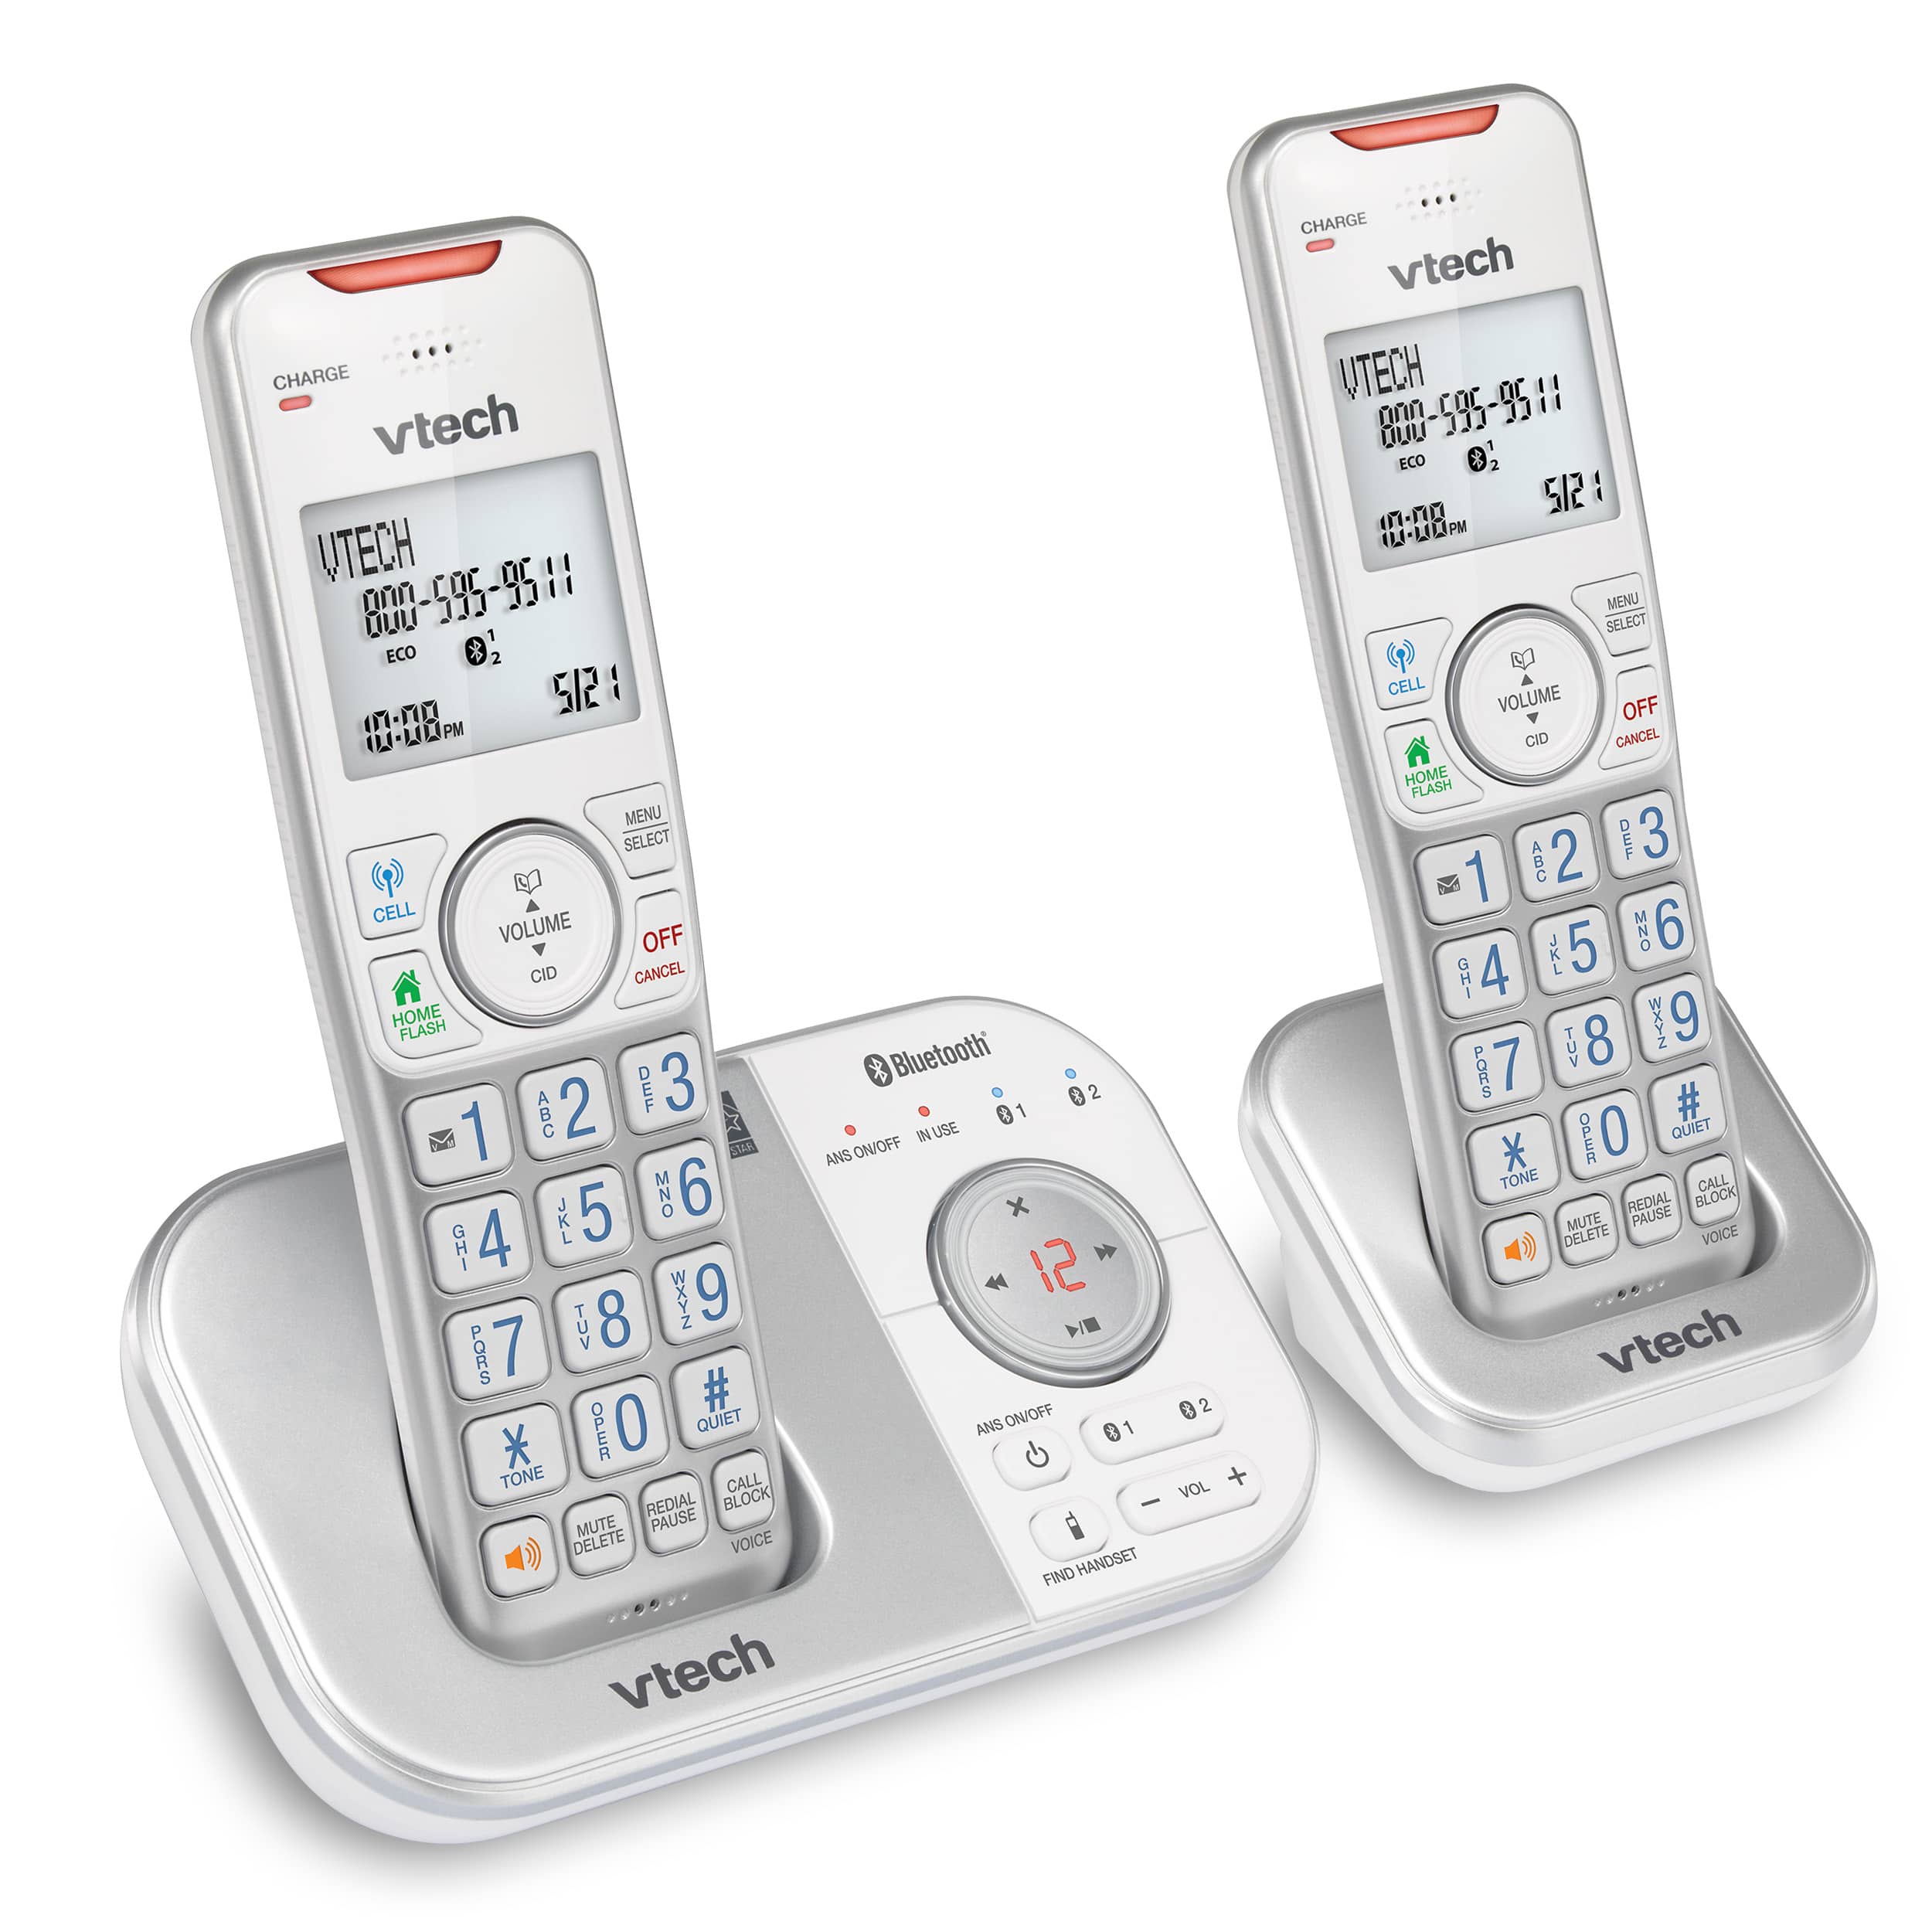 2-Handset Expandable Cordless Phone with Bluetooth Connect to Cell™, Smart Call Blocker and Answering System (Silver & White)